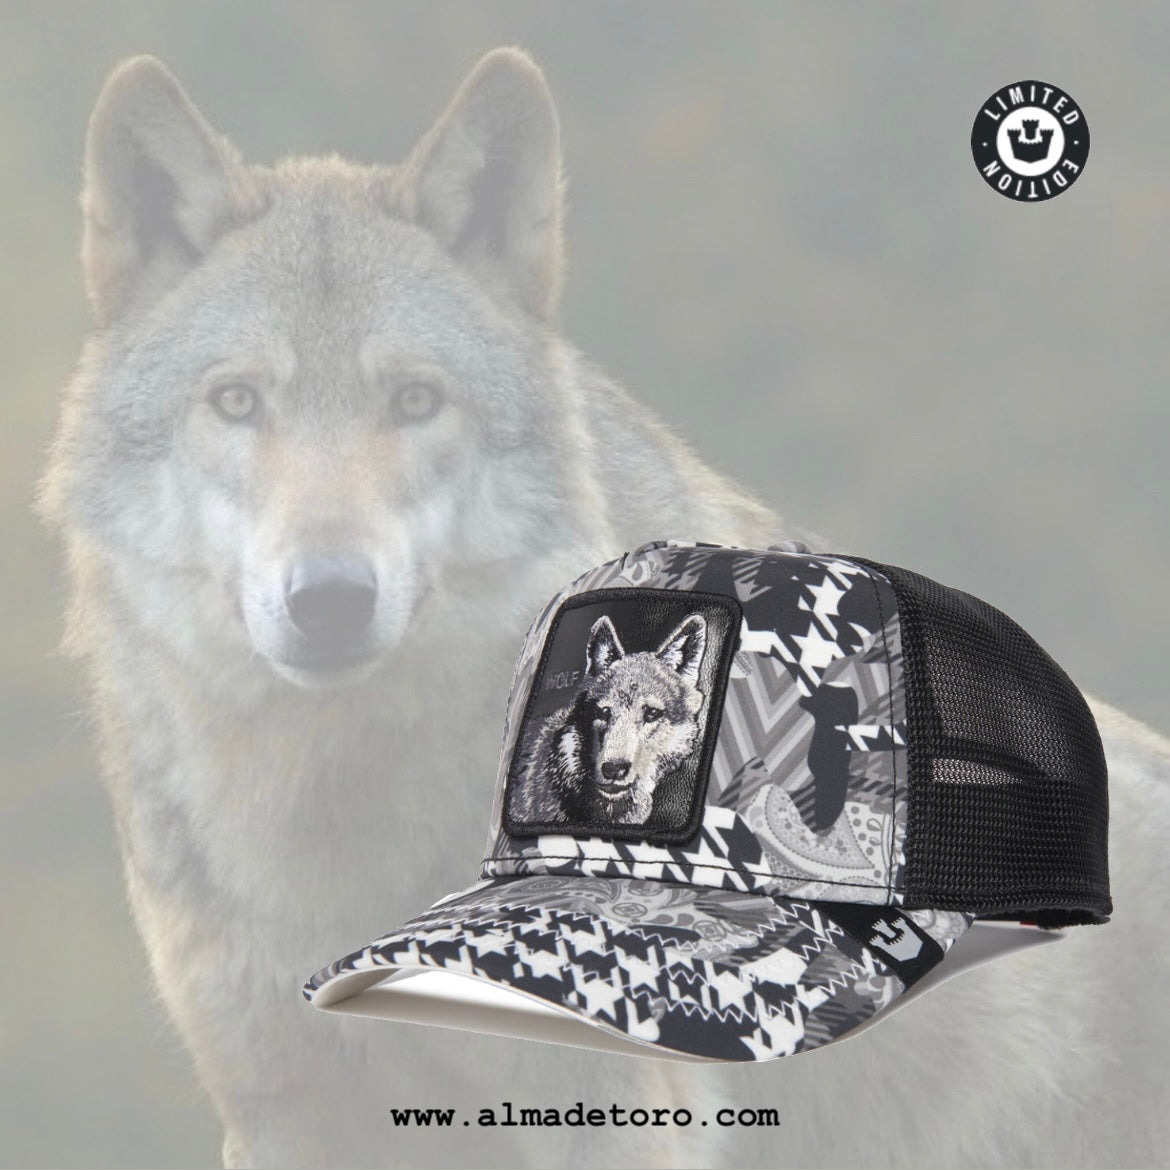 HOUNDS TOOTH Wolf Drop Edition